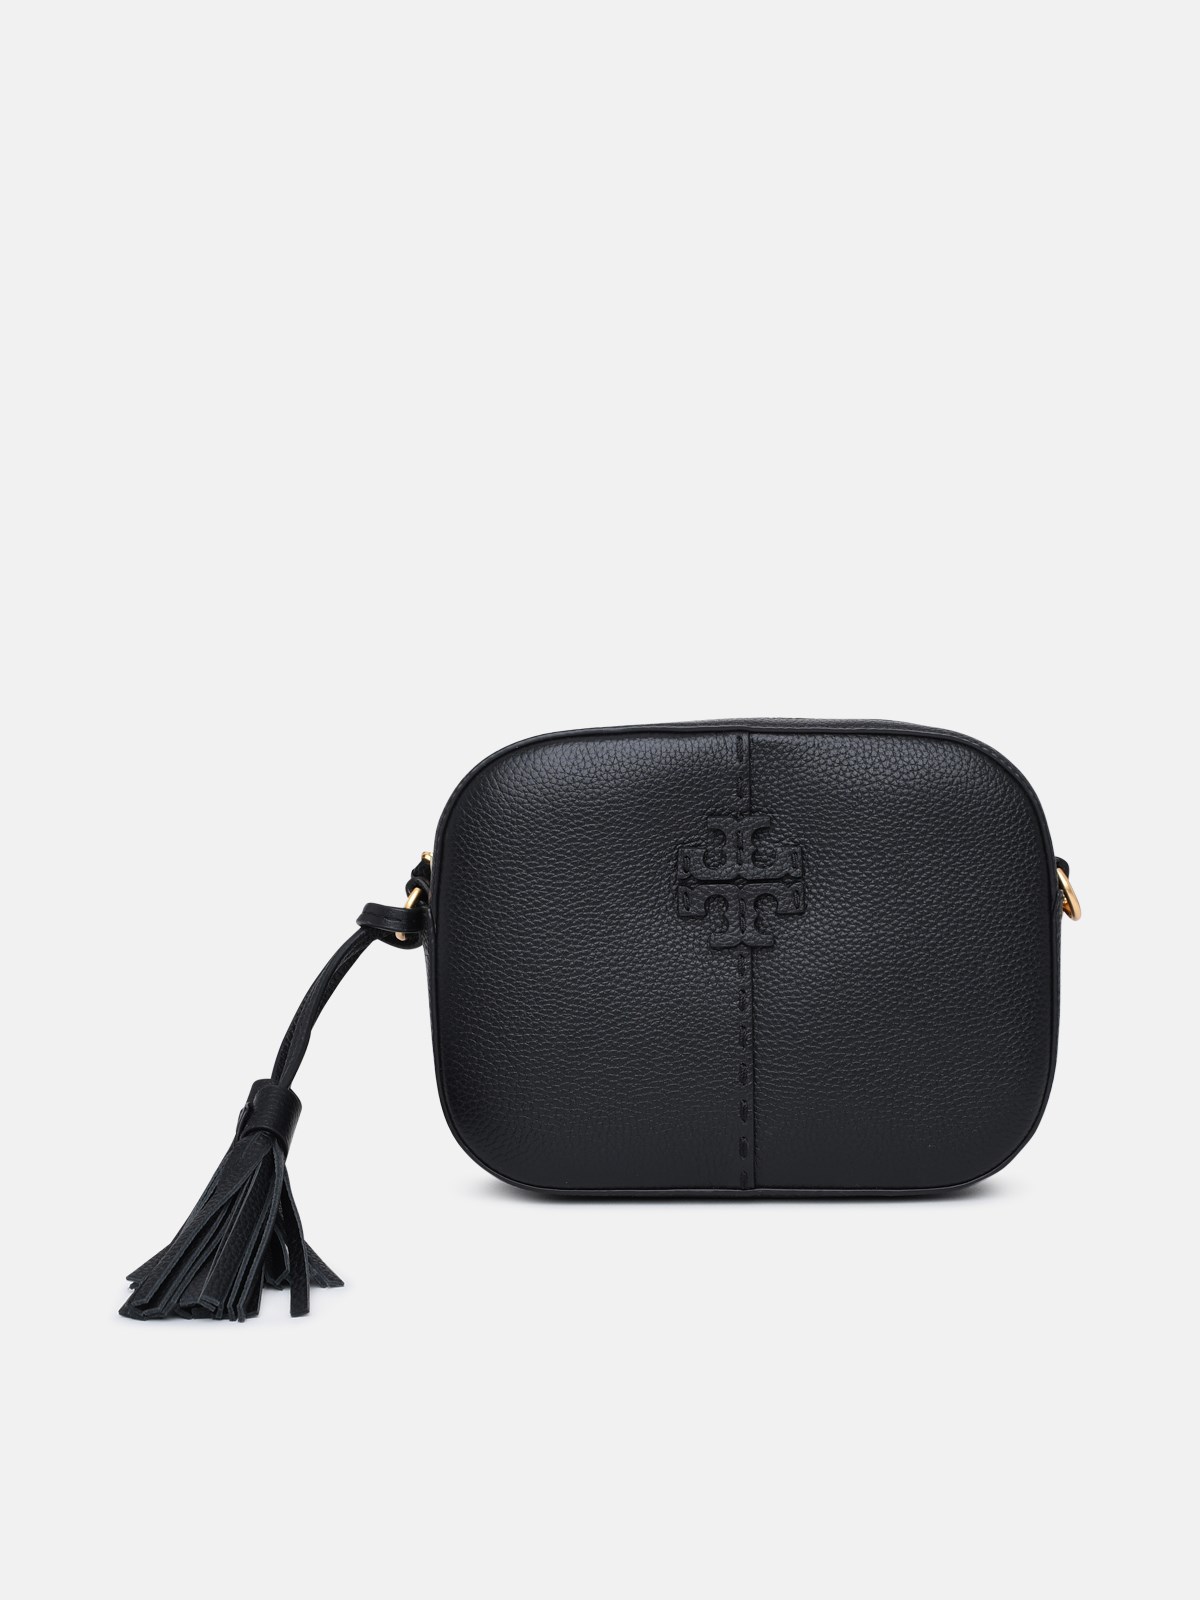 TORY BURCH LEATHER MCGRAW BAG